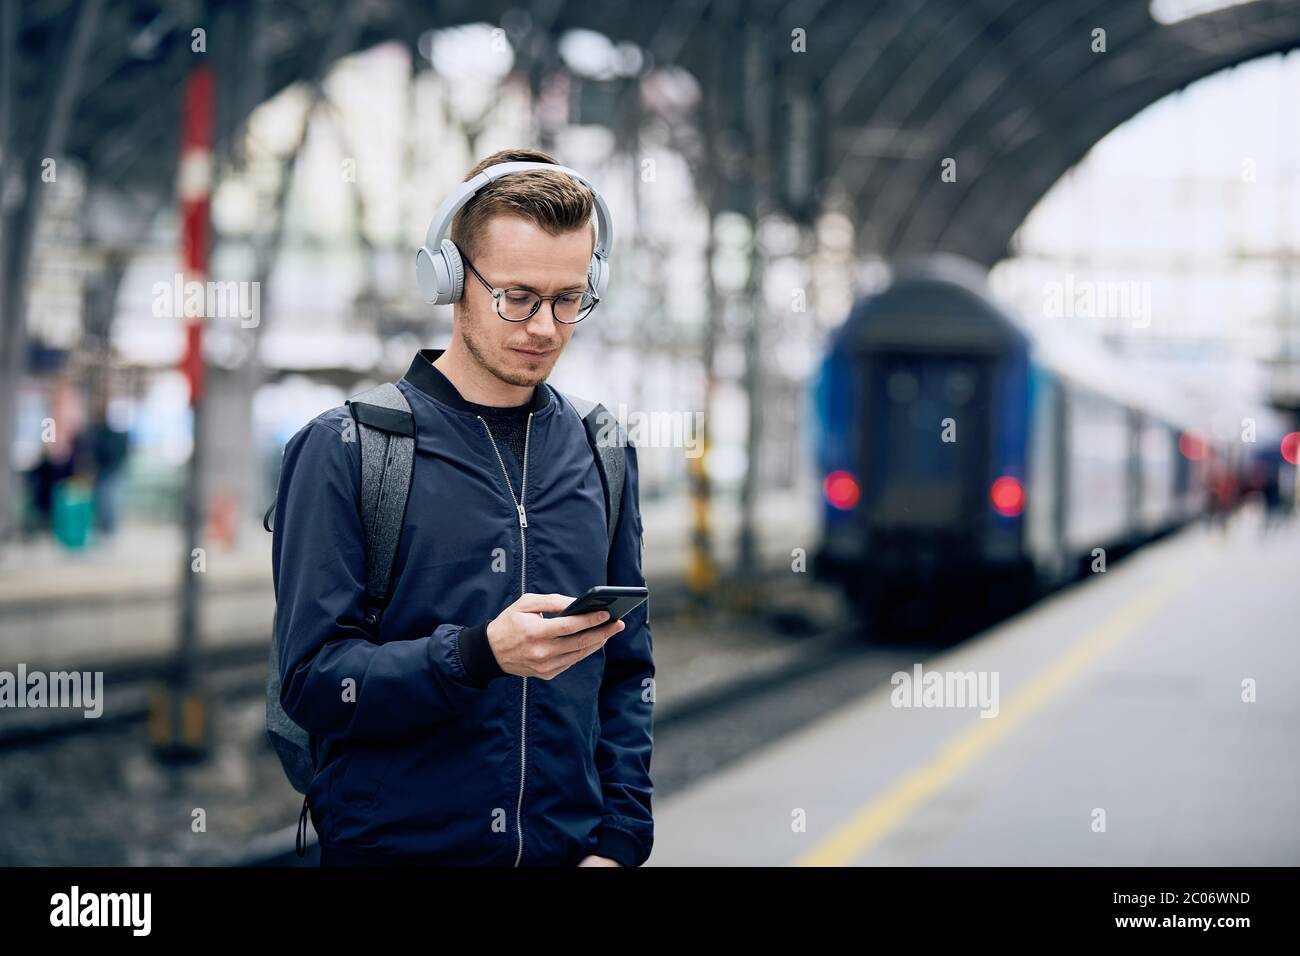 Young man with headphones listening music using phone against train at railroad station. Stock Photo